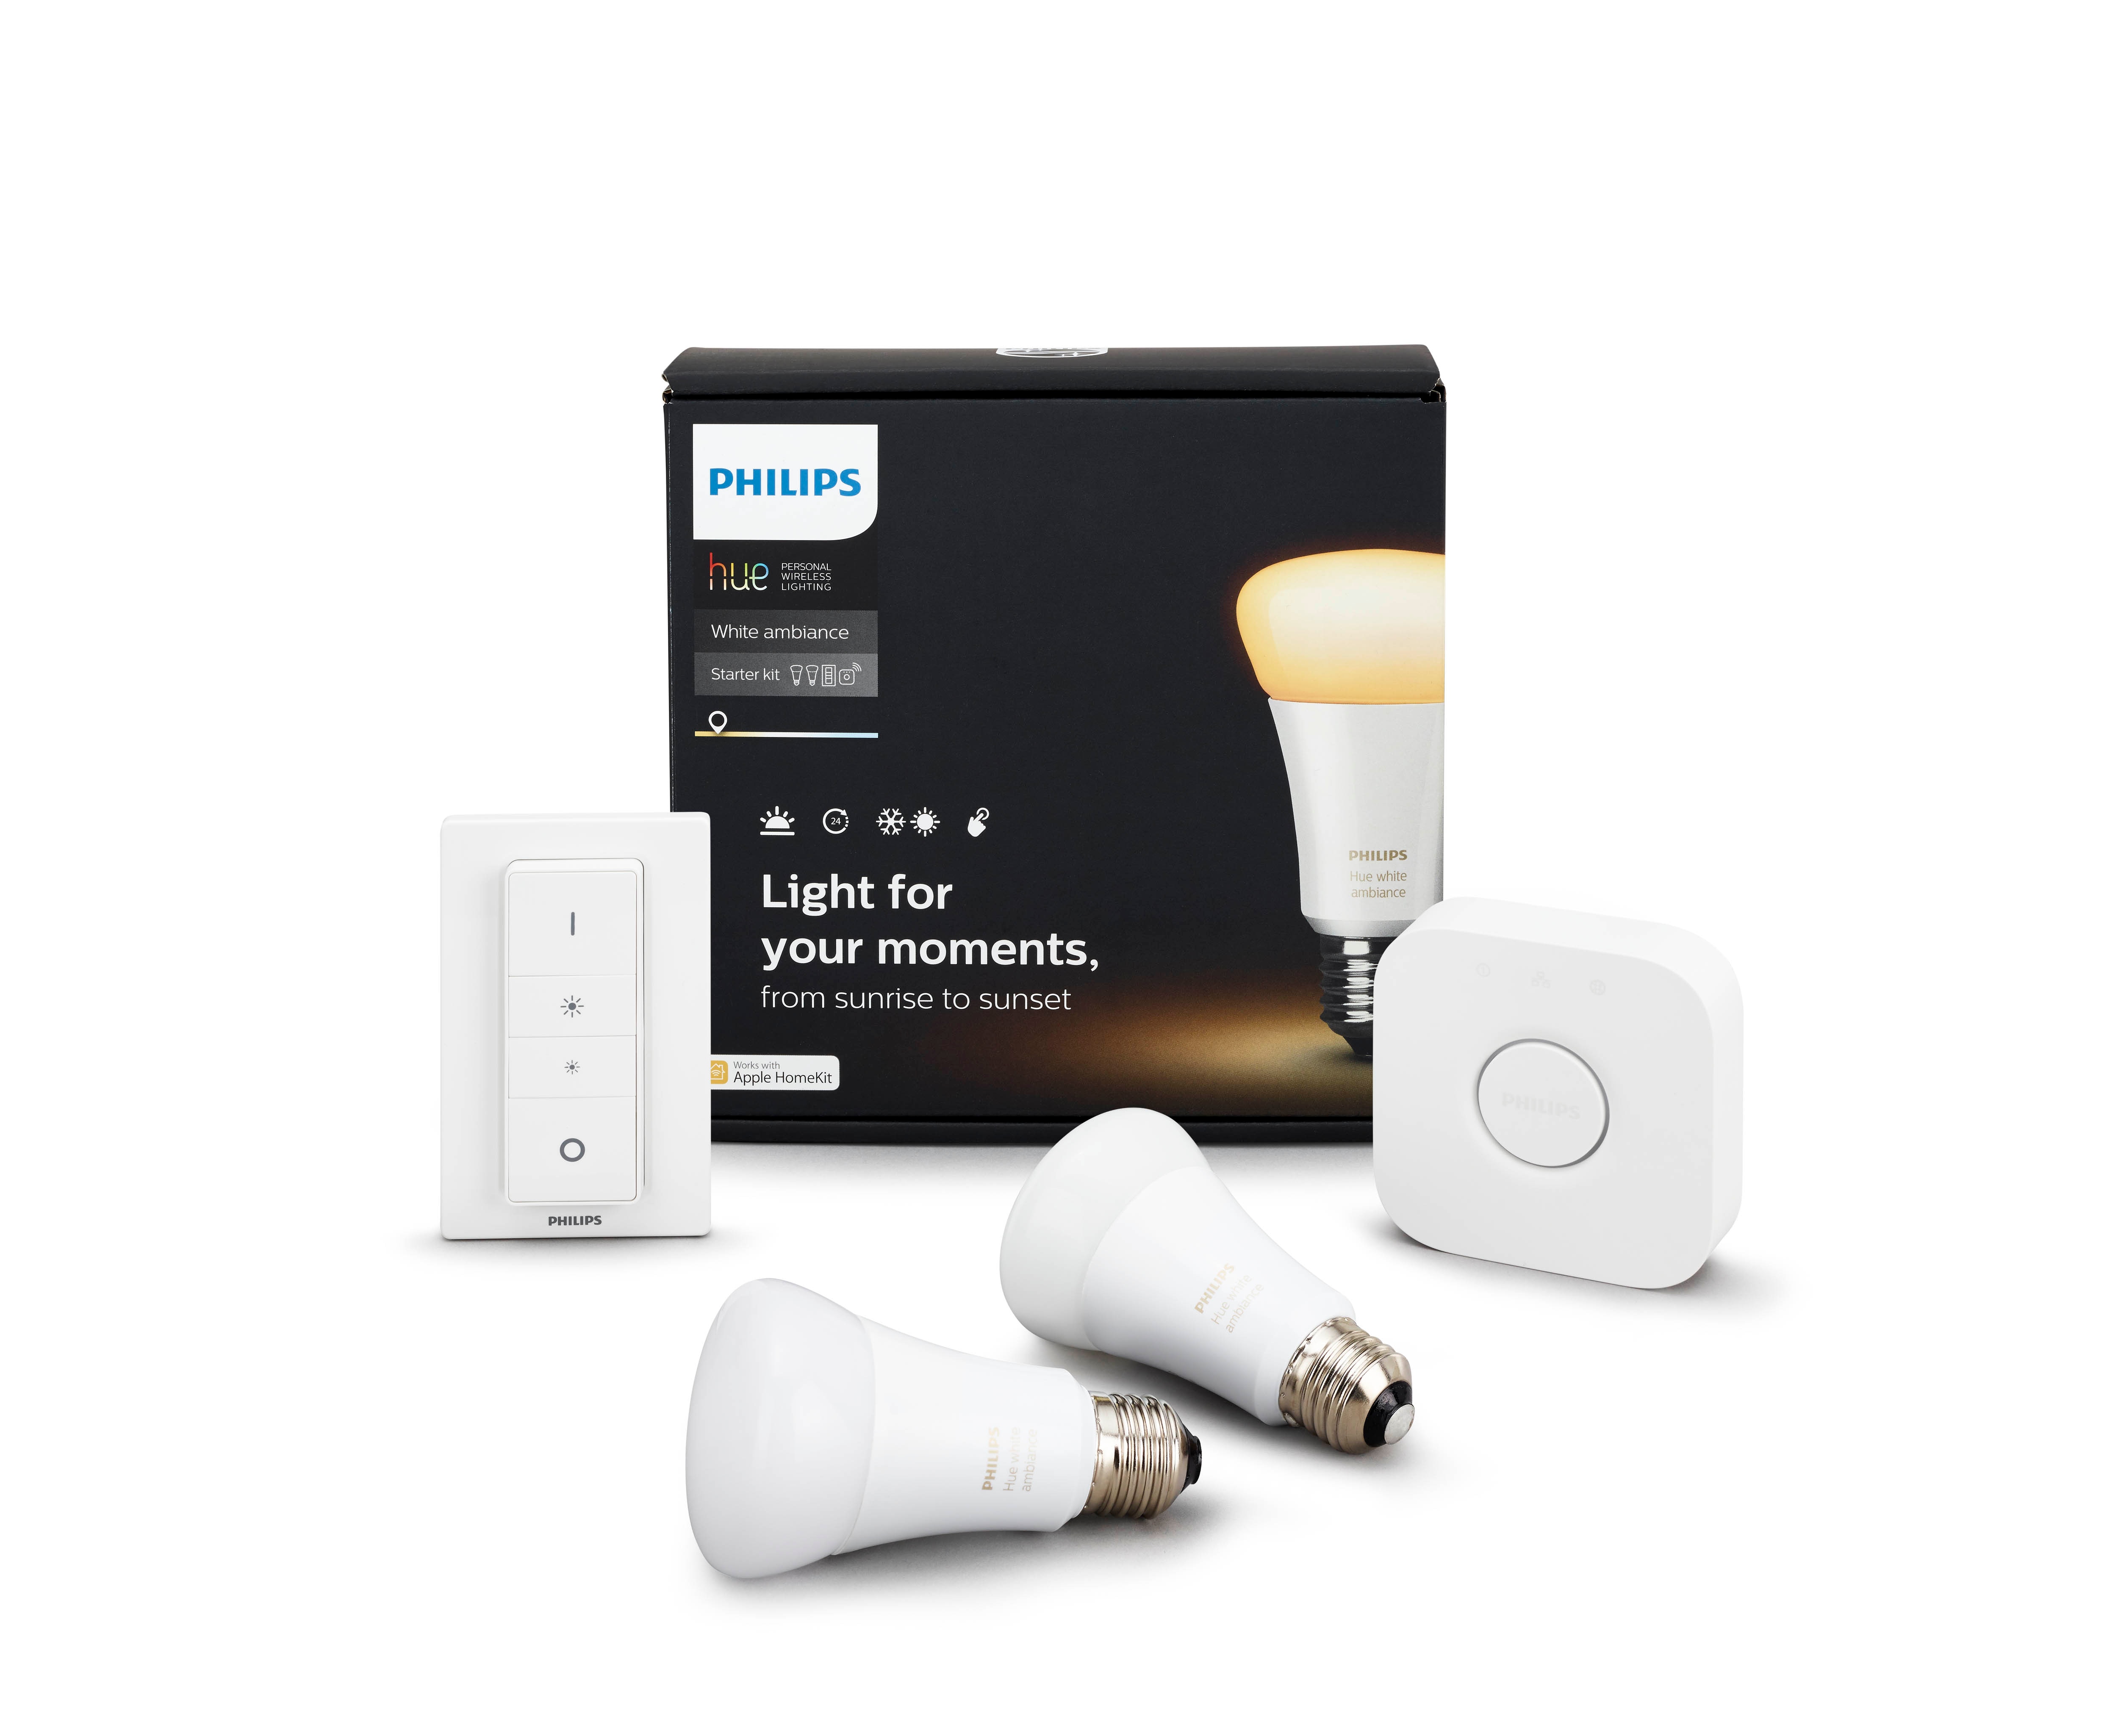 Enhance your daily routines: Philips Hue ambiance now on sale - News center | Philips